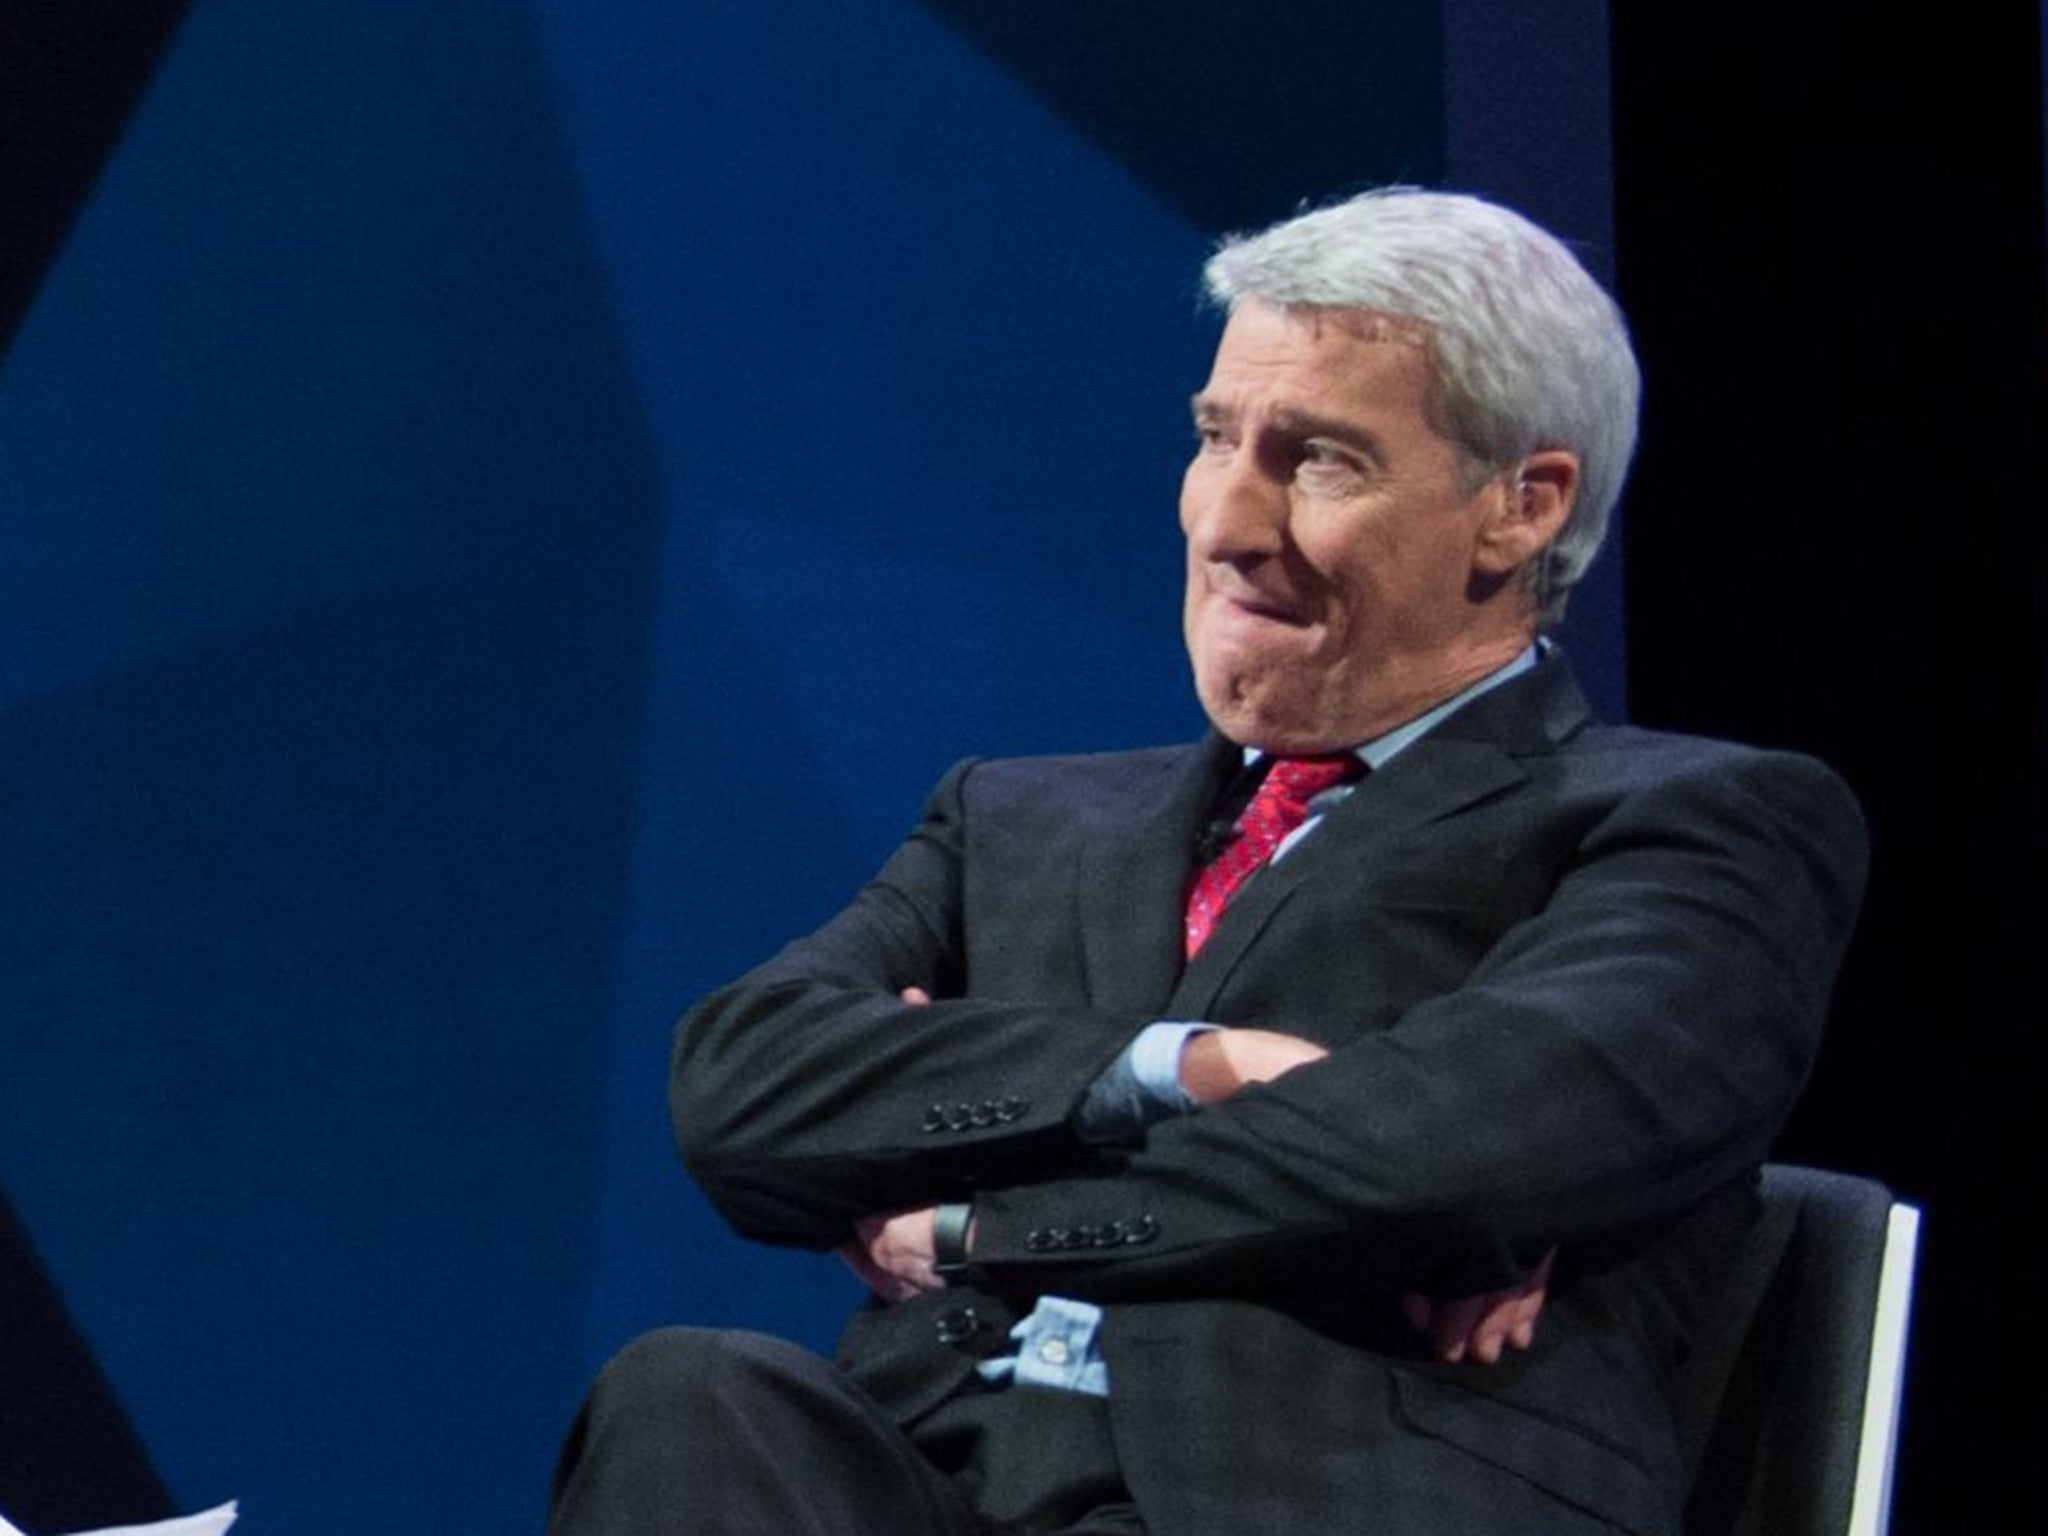 Paxman gained a reputation as a fearsome interviewer